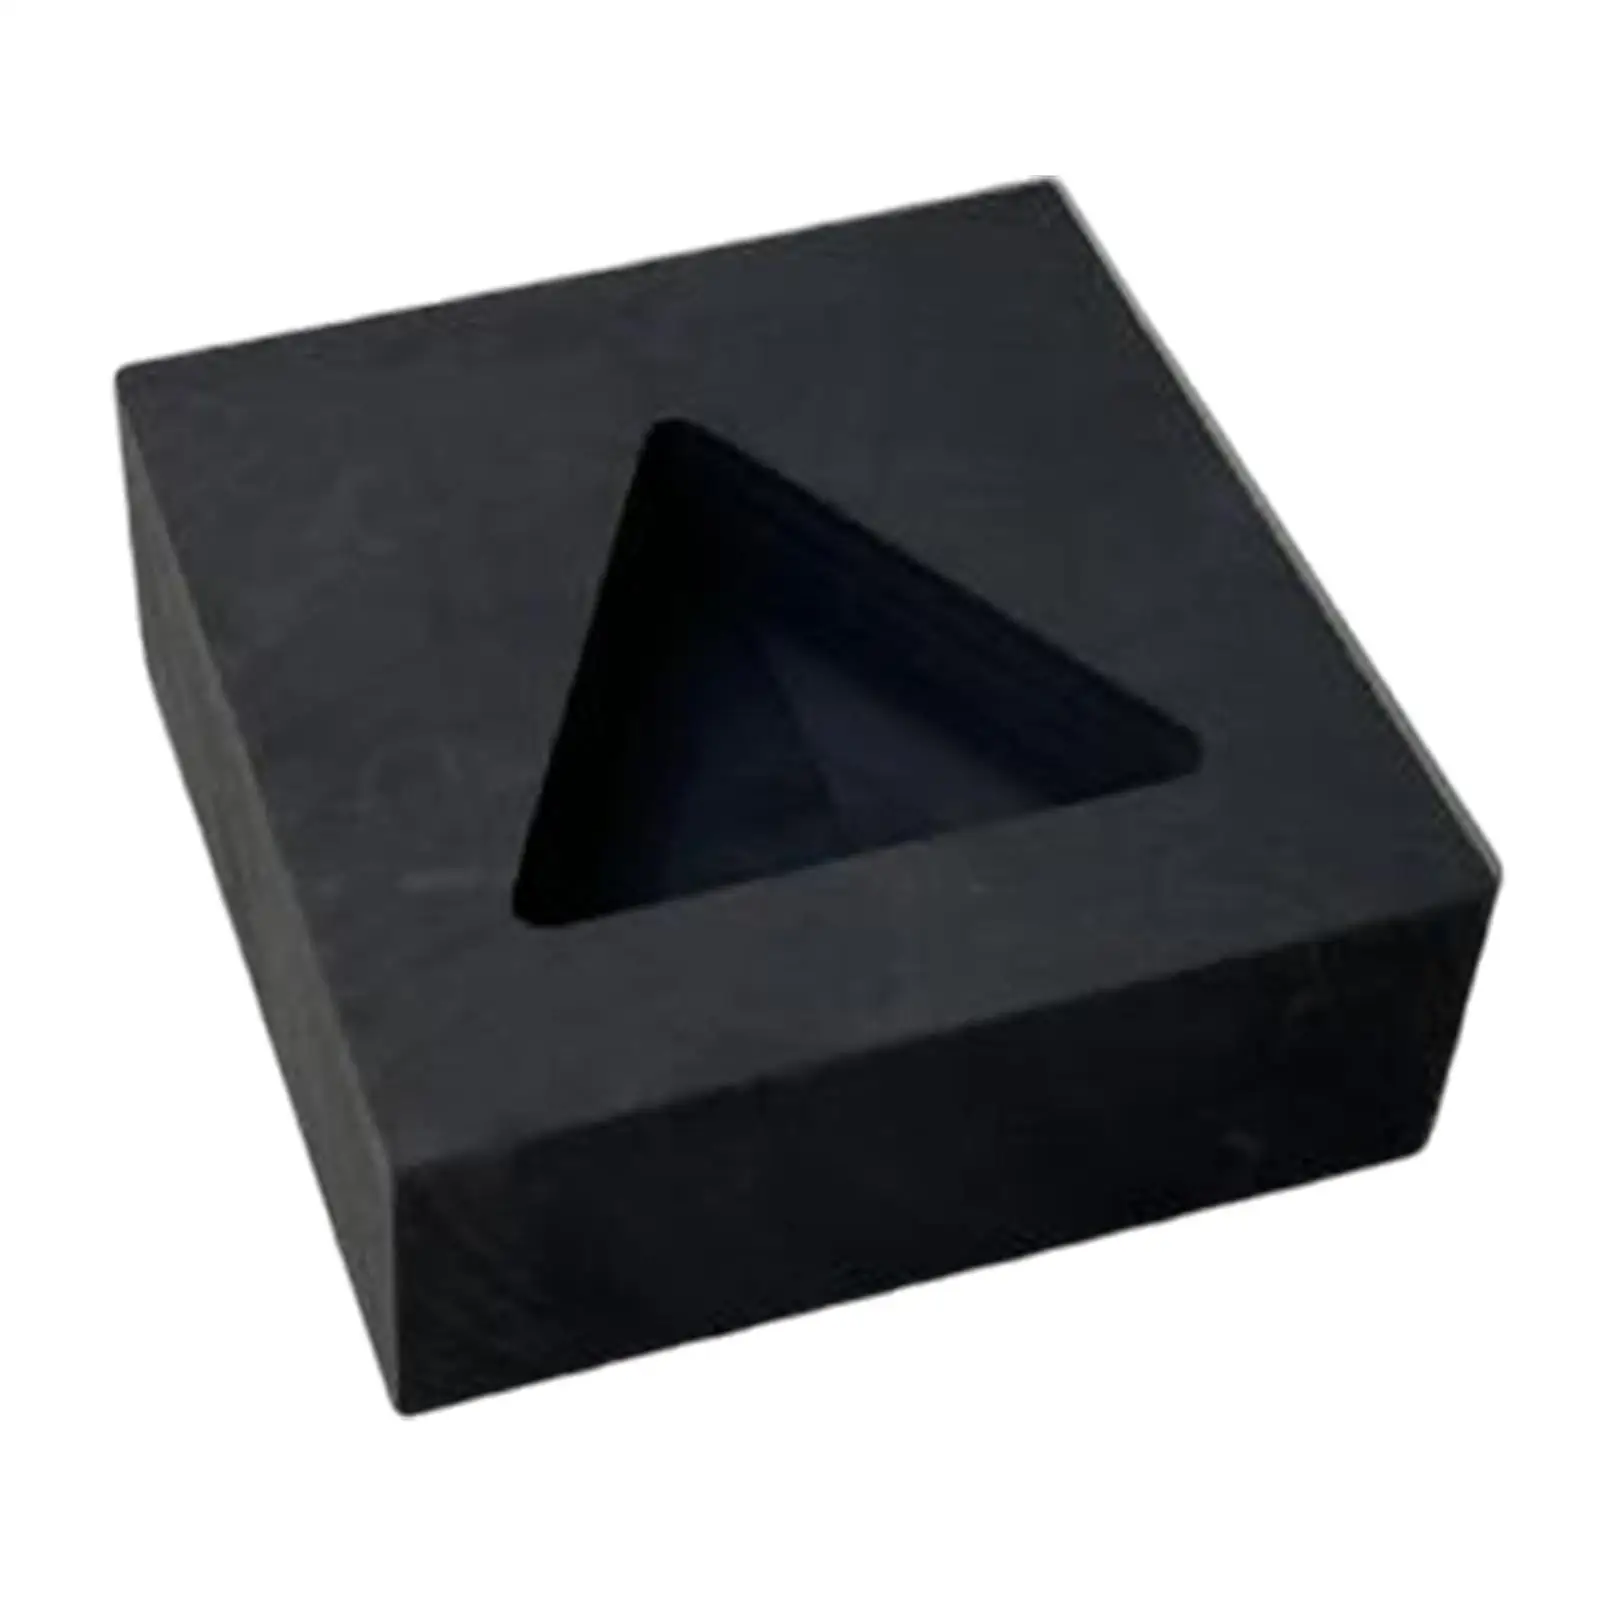 Graphite Ingot Mold Mould Crucible High Density for Metal Casting Metal Jewelry Gold Silver Copper Melting Pendant Scrap